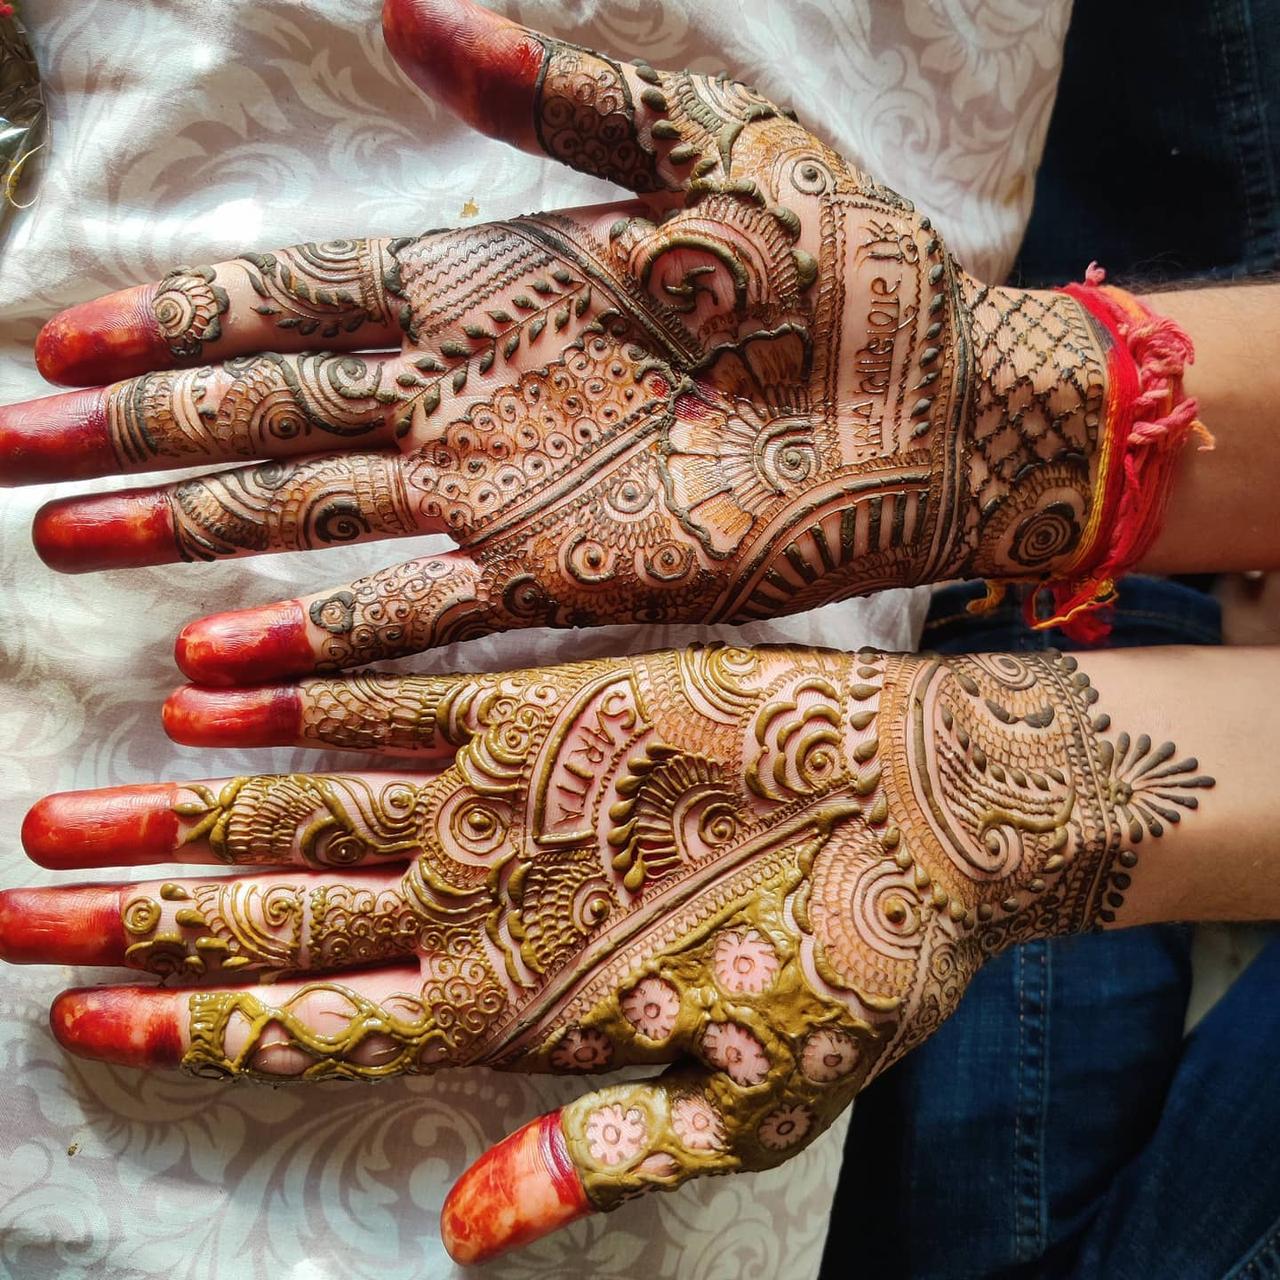 31 Front Hand Simple Mehndi Design To Fall In Love With